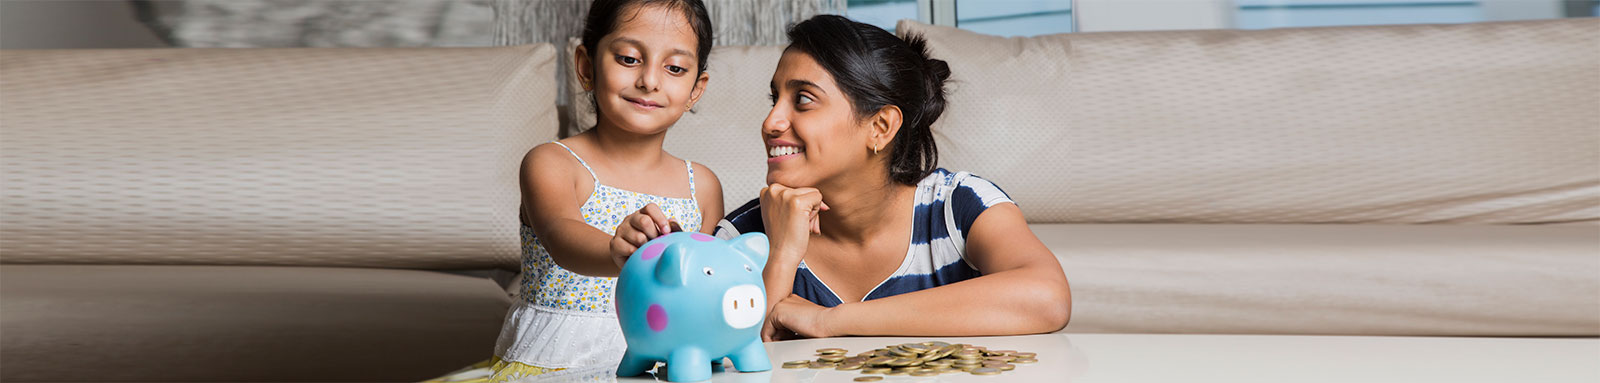 Mother looking at daughter putting money in blue piggy bank